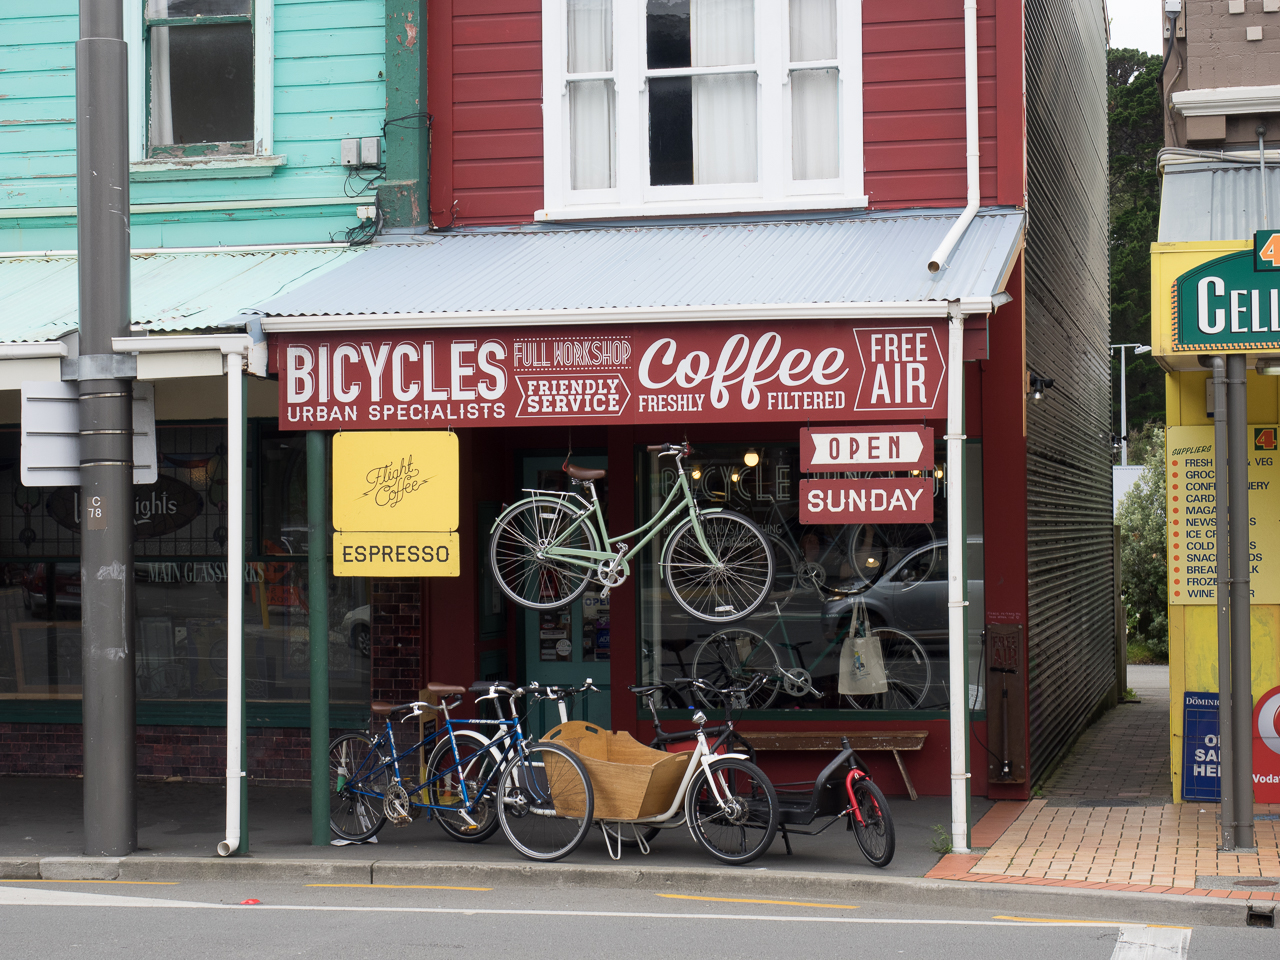 Your basic hipster bike shop, complete with beautiful typography.